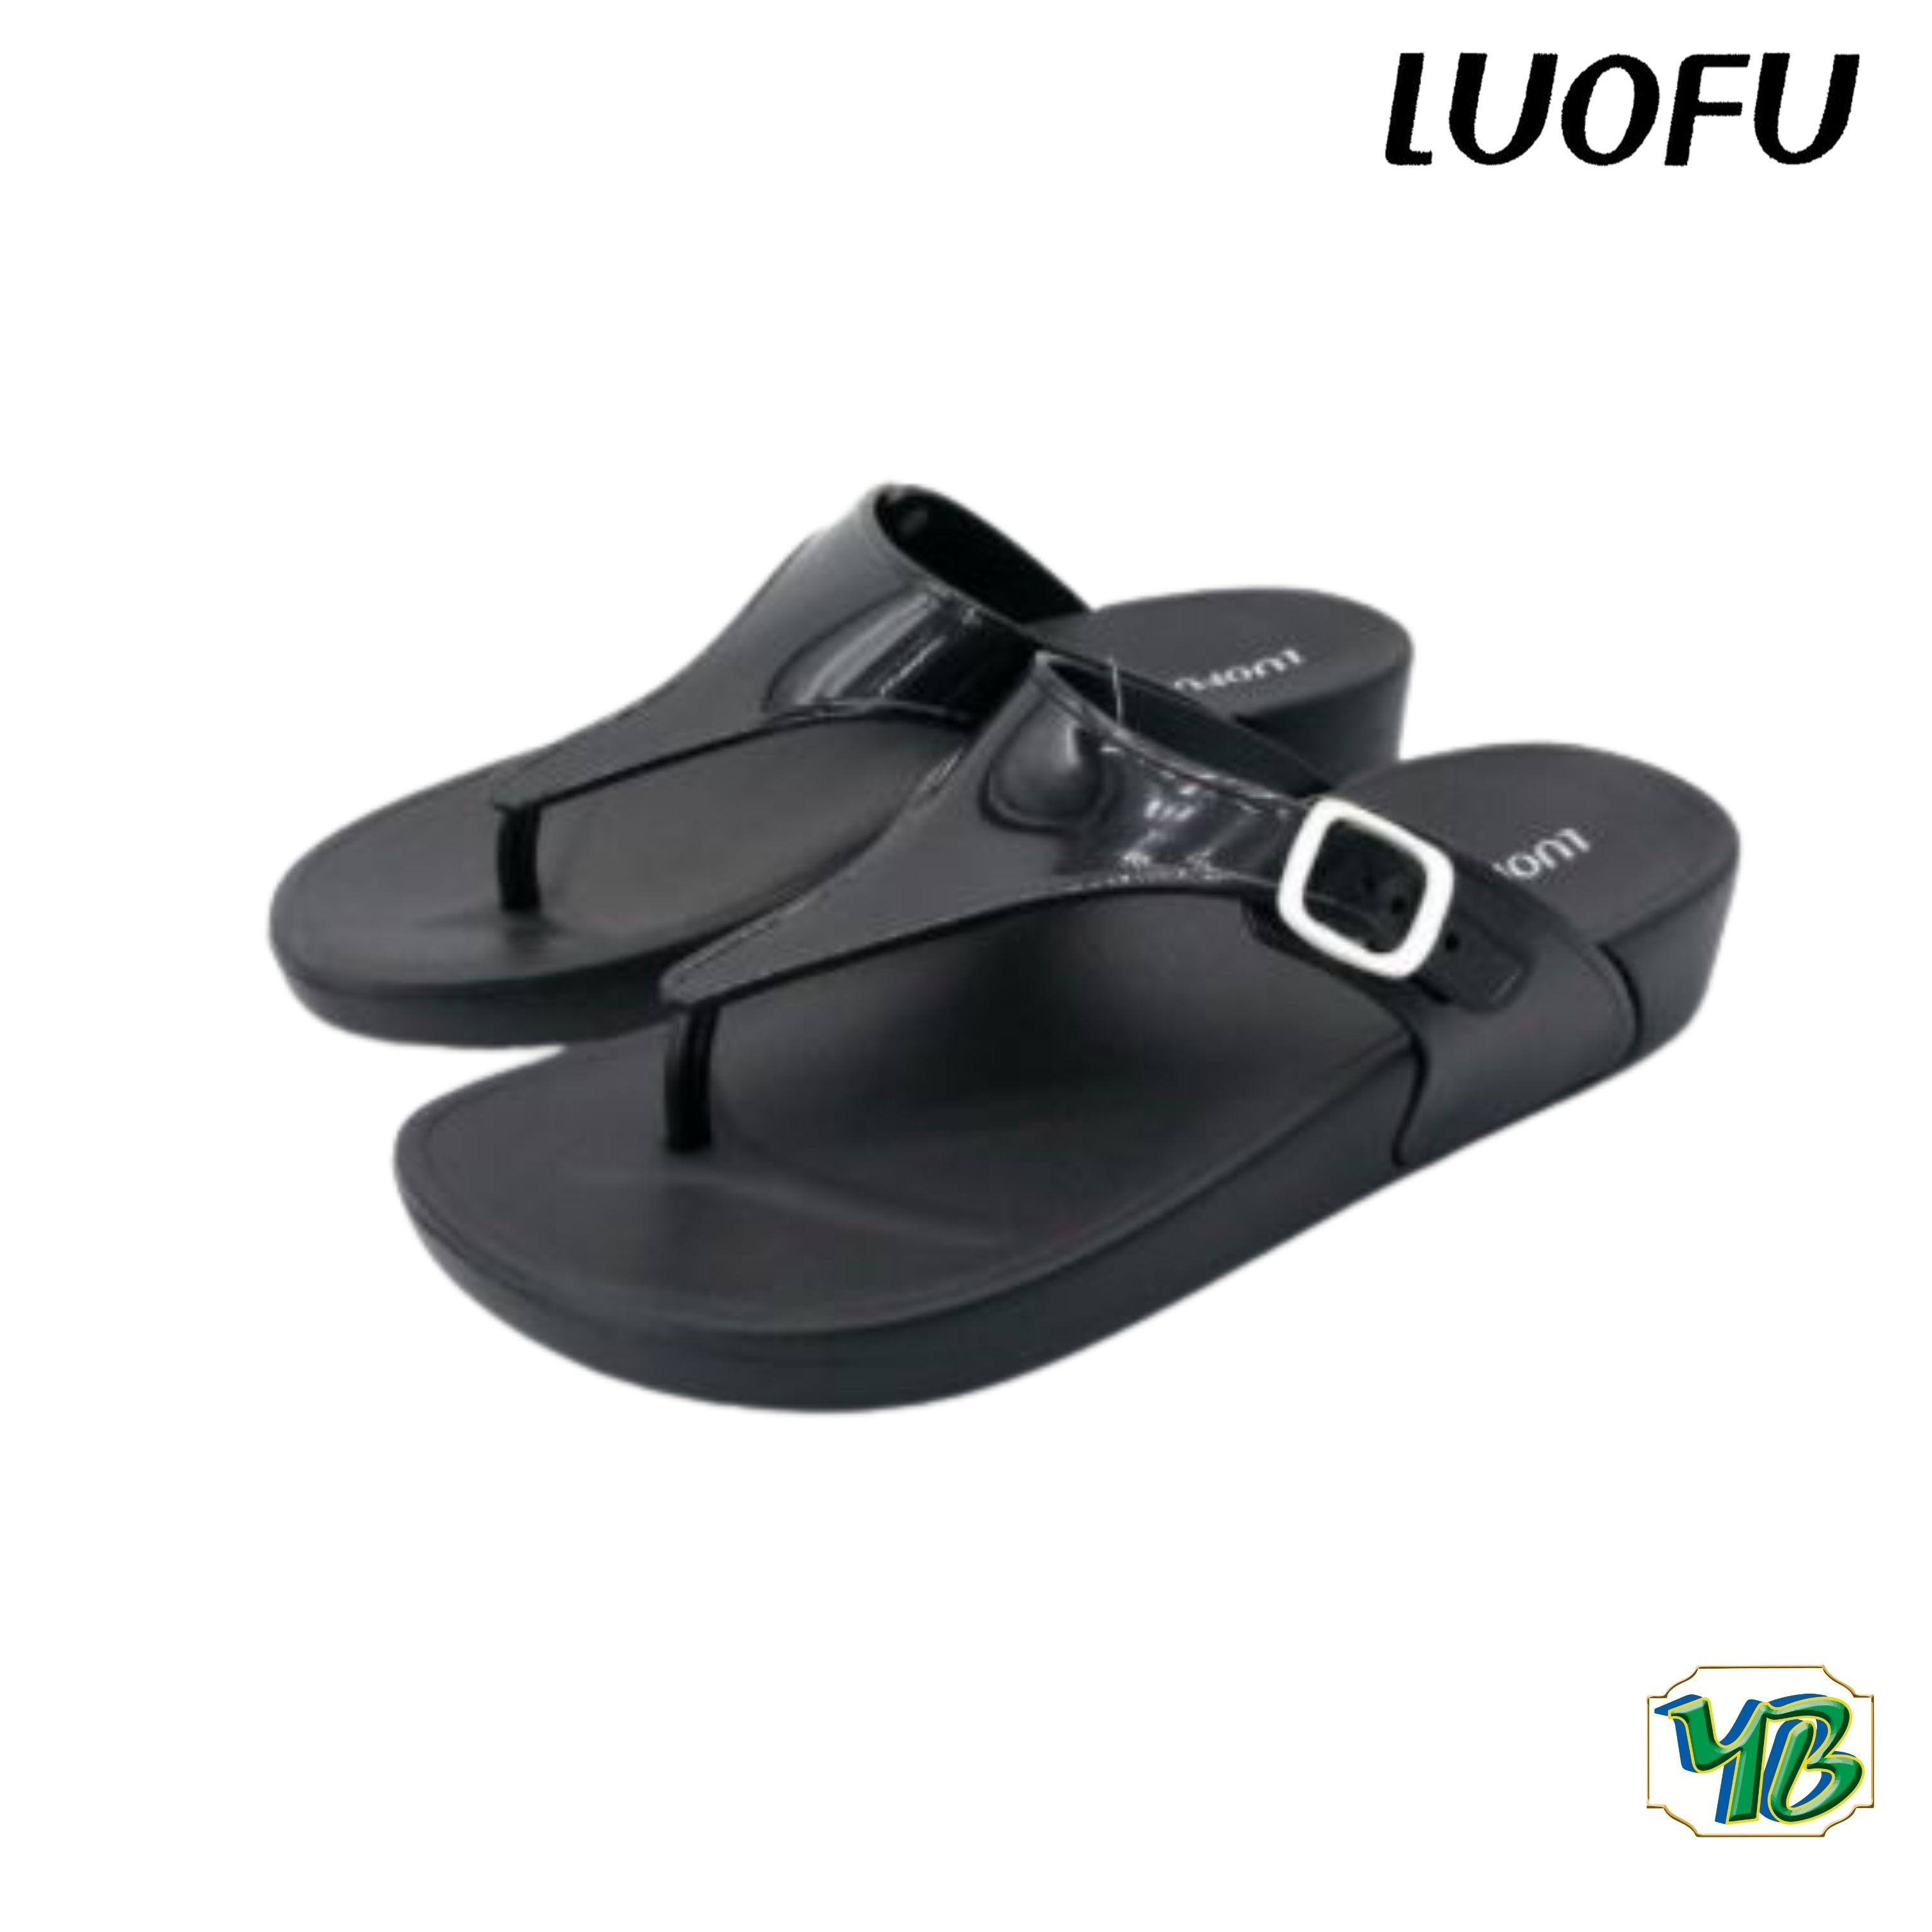 luofu slippers online